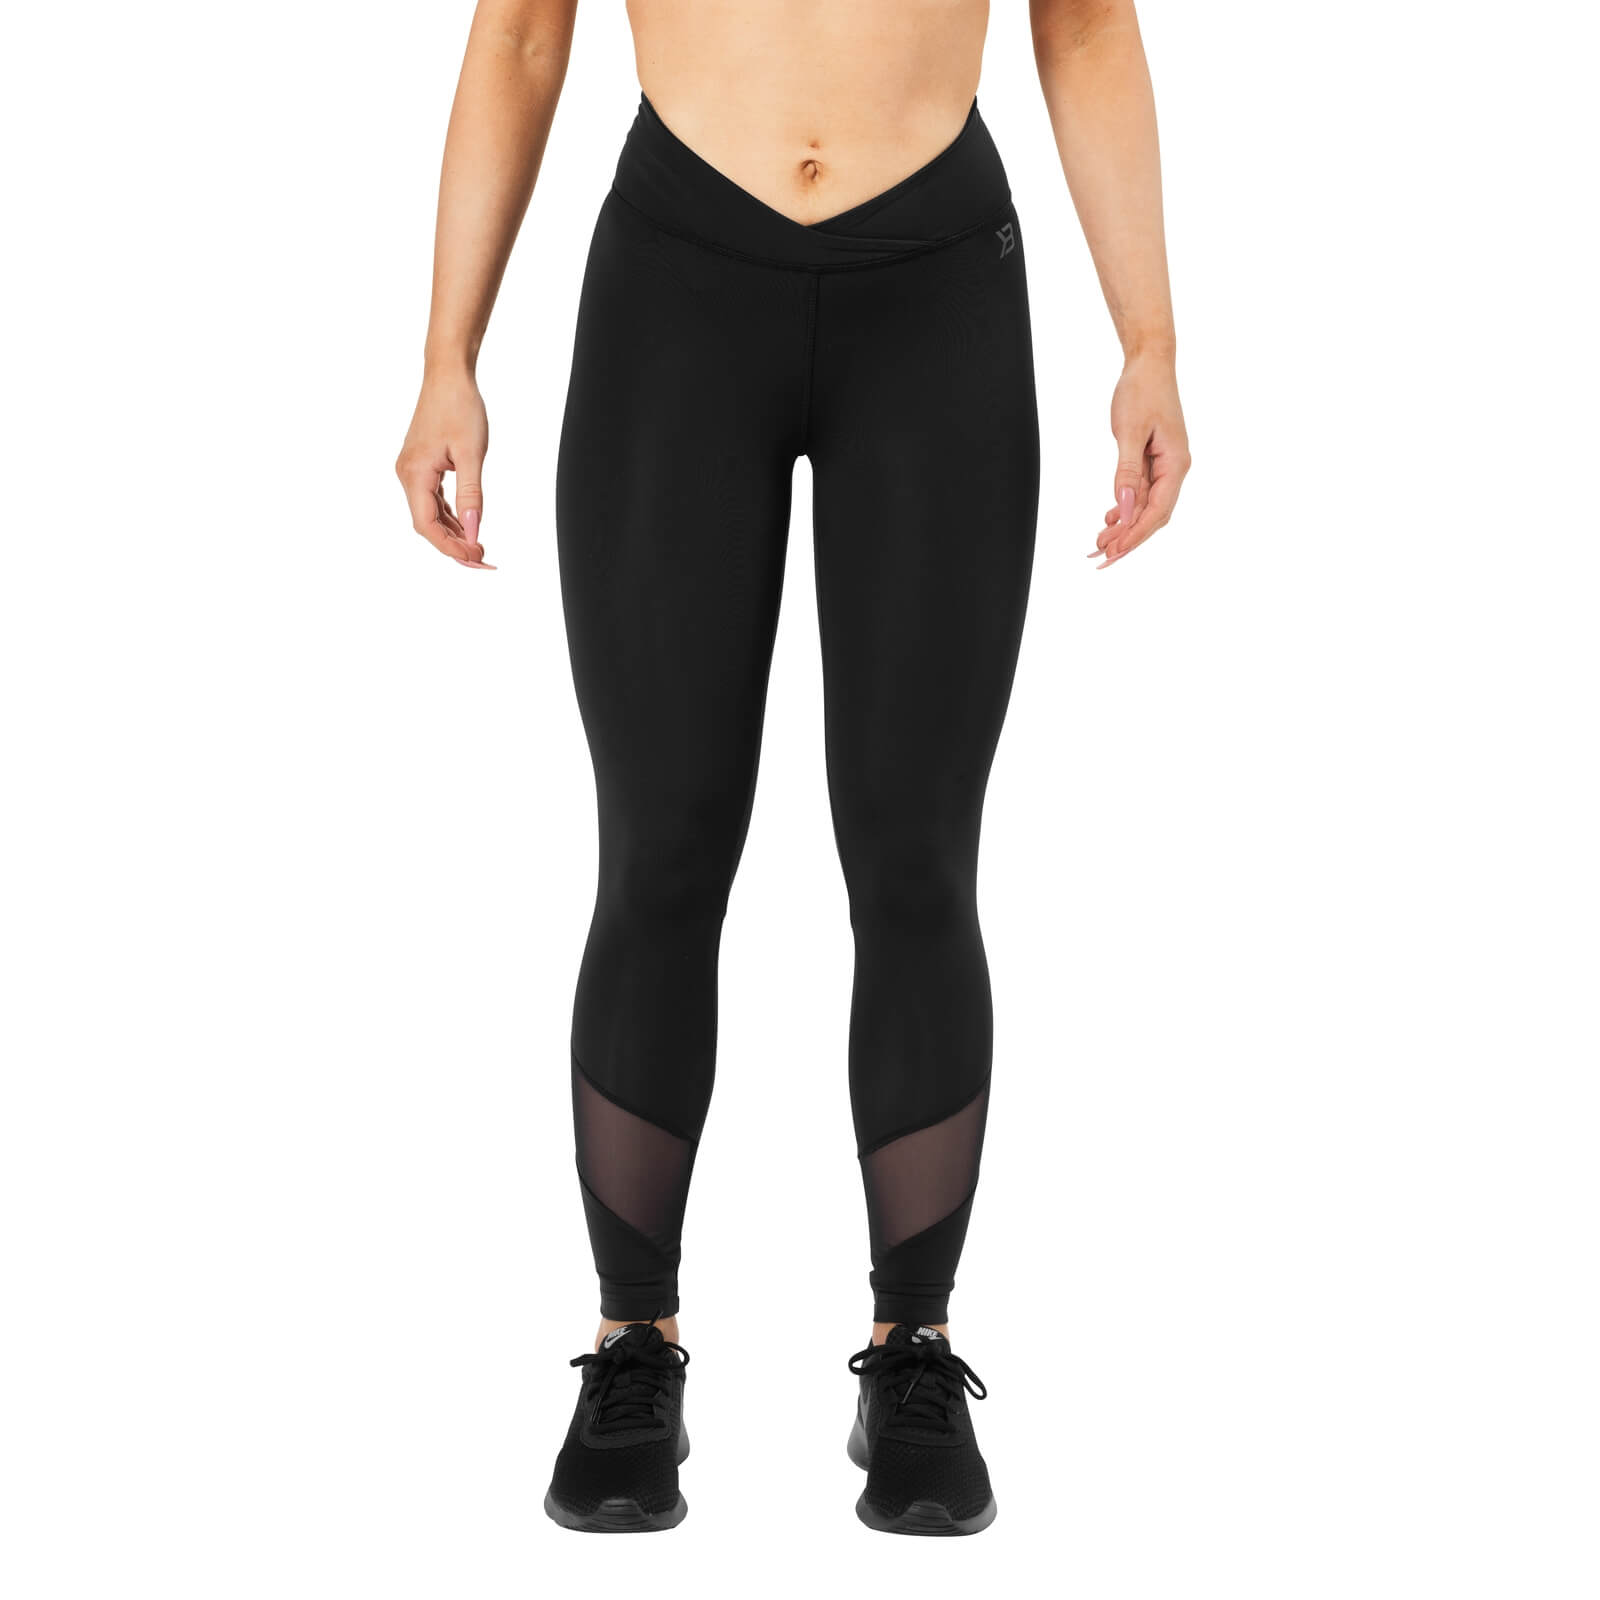 Wrap Tights, black, Better Bodies